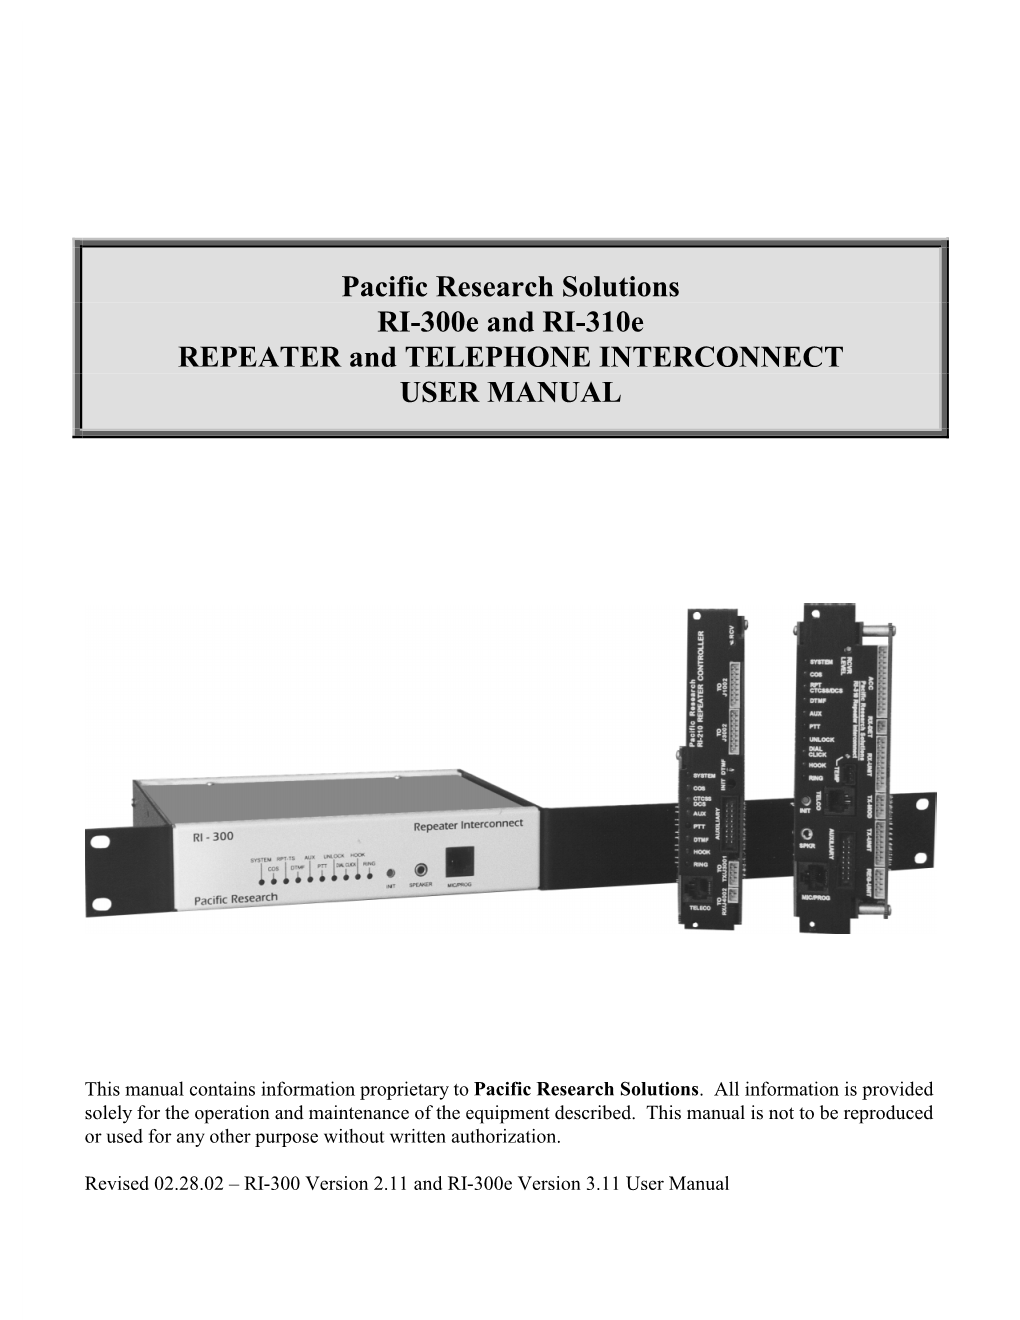 Pacific Research Solutions RI-300E and RI-310E REPEATER and TELEPHONE INTERCONNECT USER MANUAL